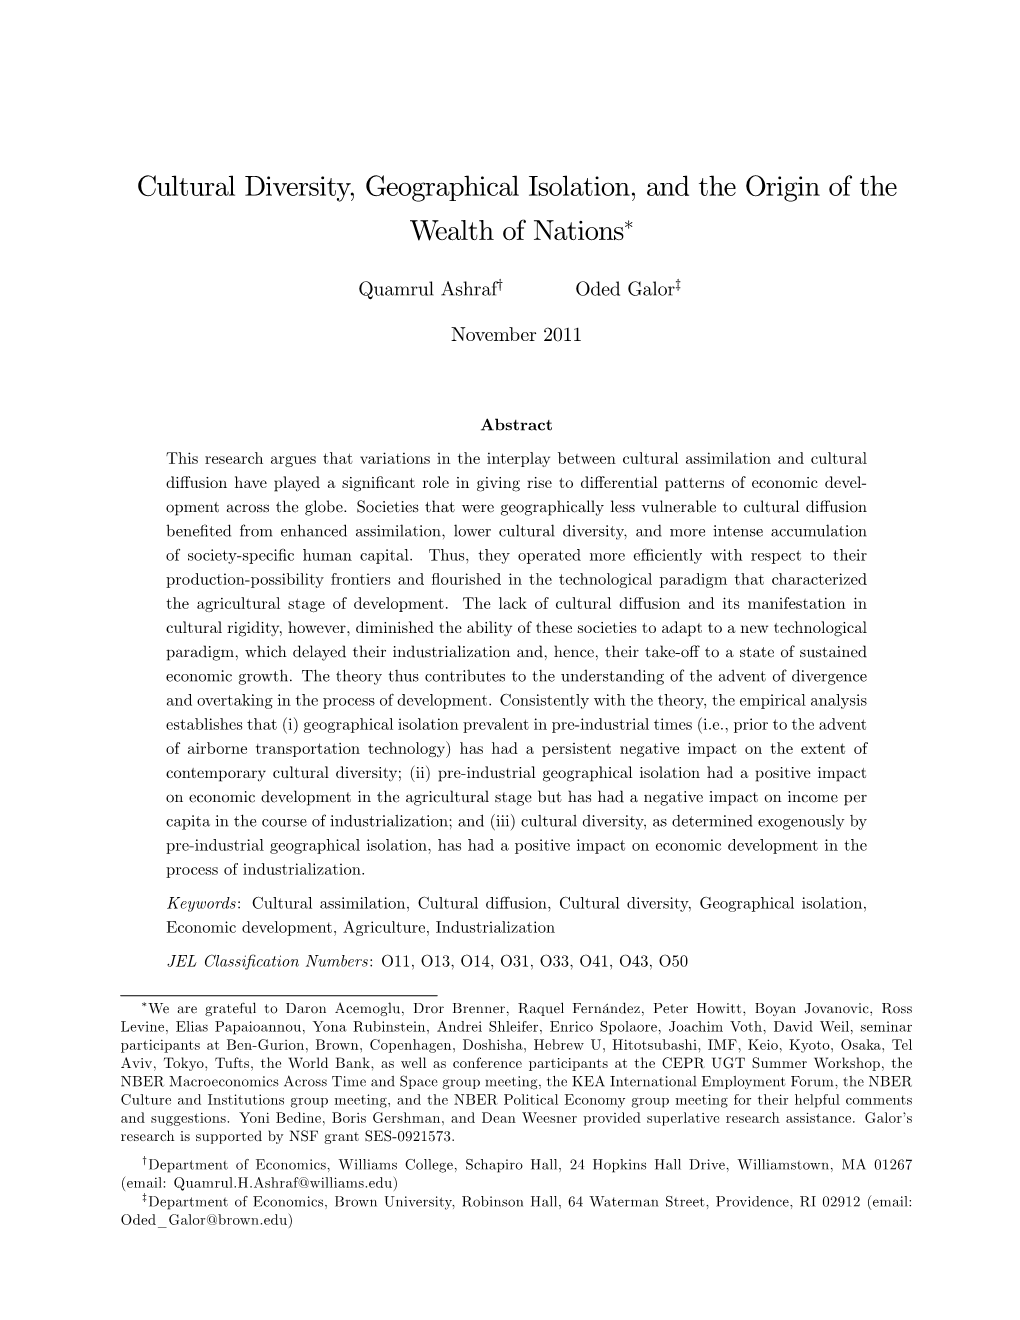 Cultural Diversity, Geographical Isolation, and the Origin of The